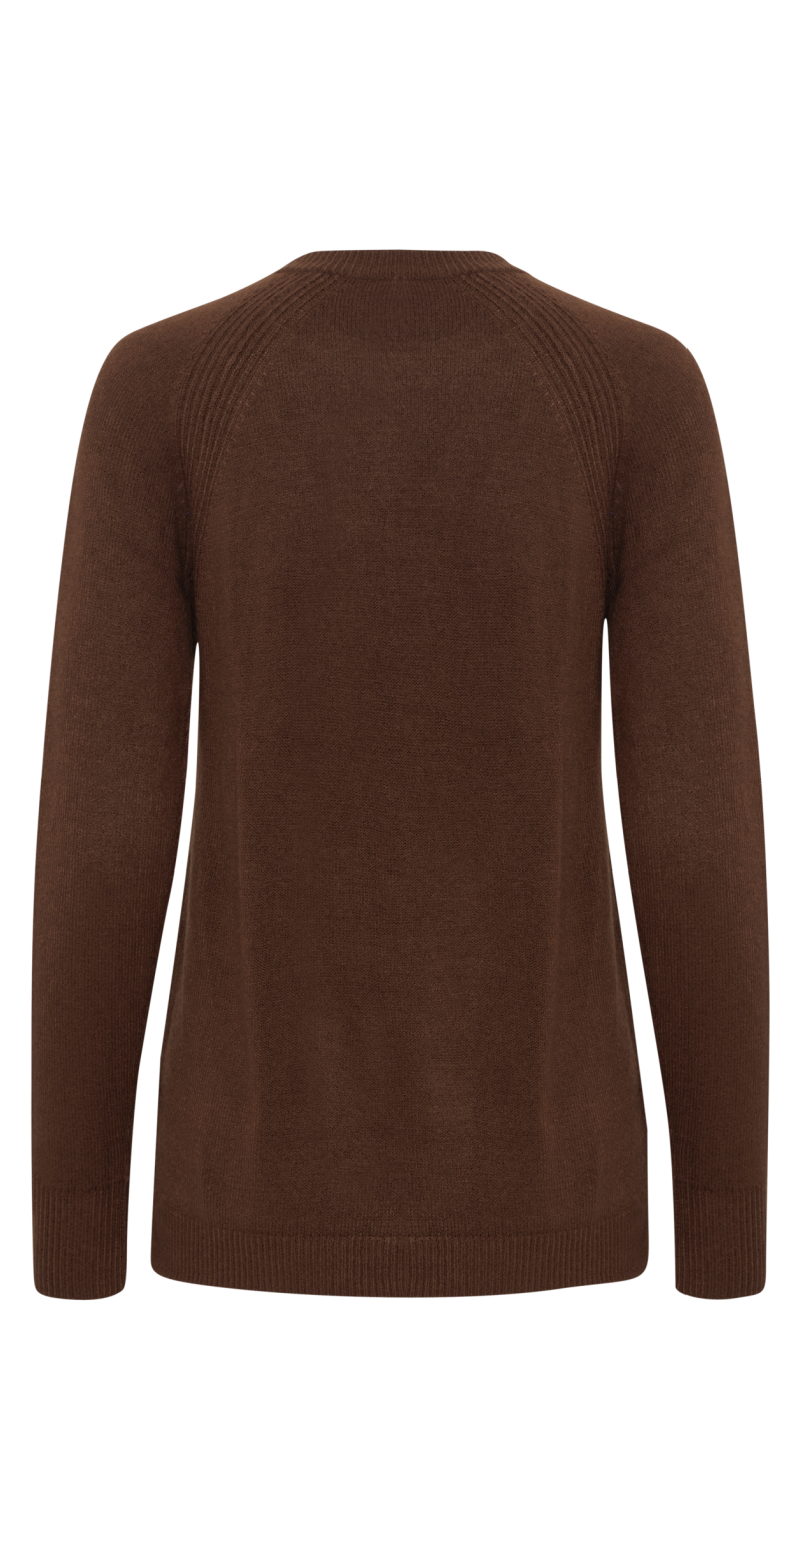 Strikket pullover chicory coffee